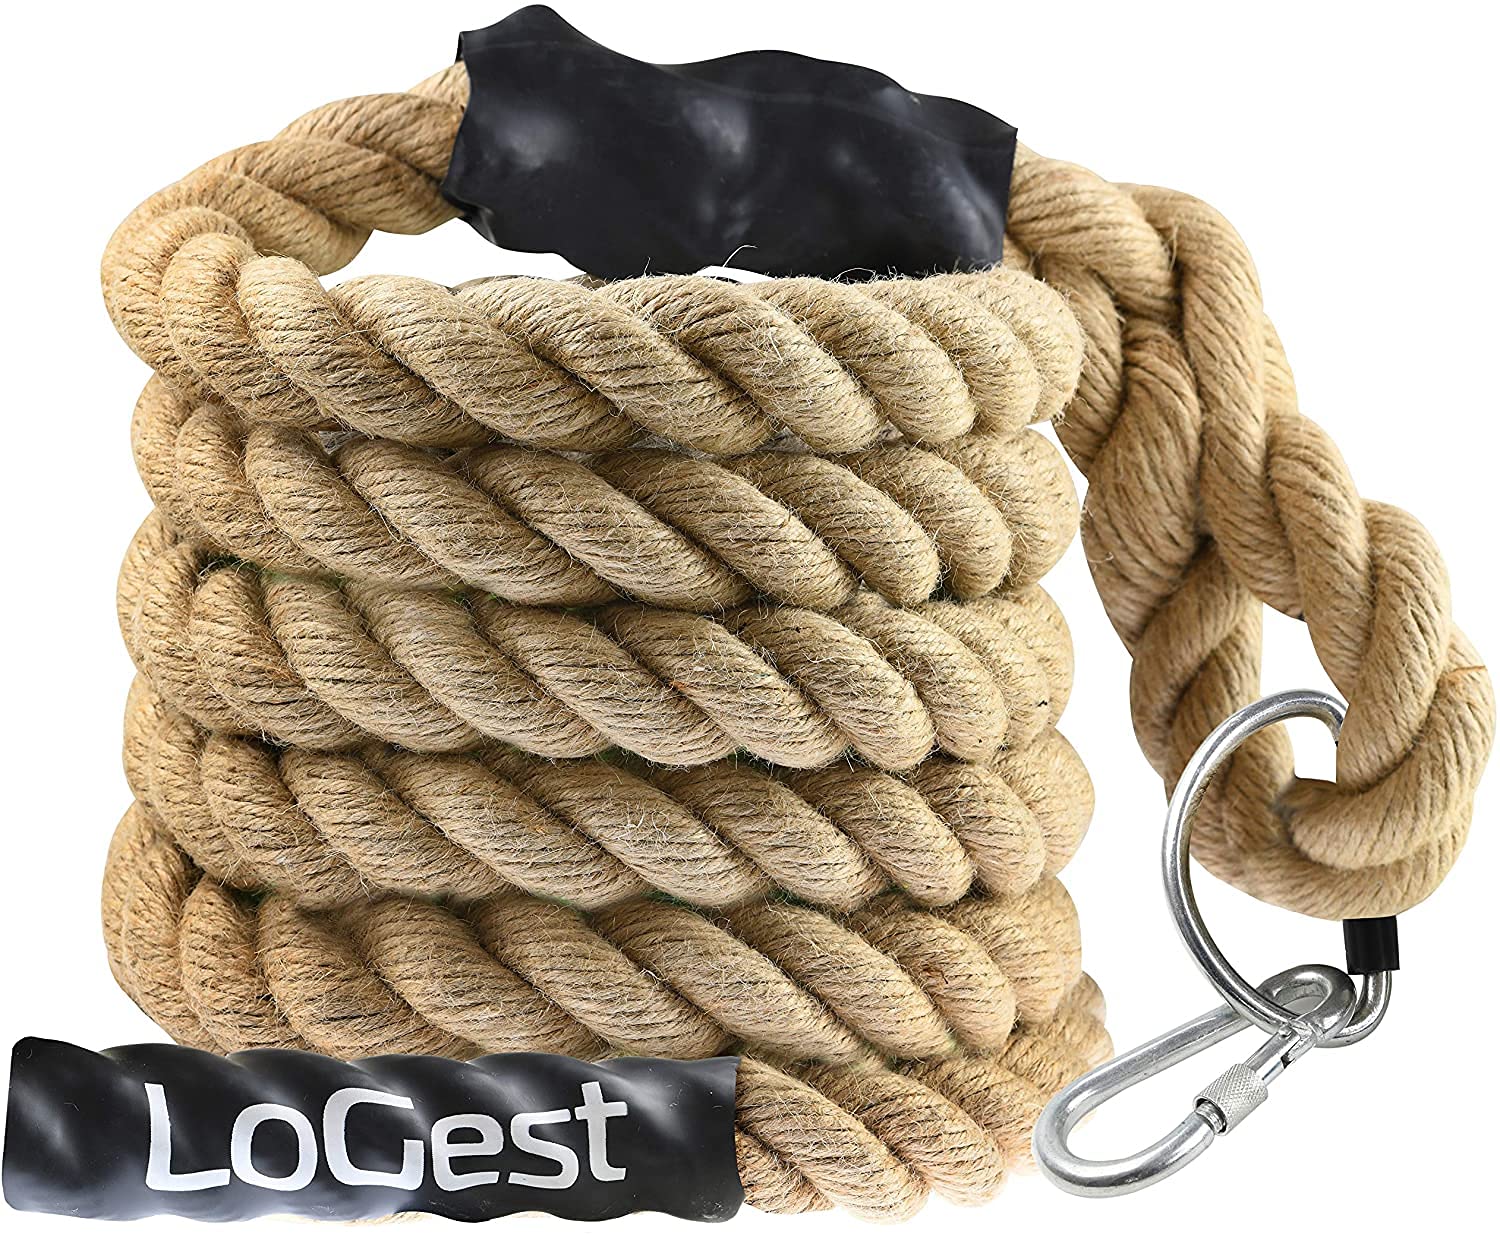 Logest Climbing Rope - Indoor and Outdoor Workout Rope 1.5